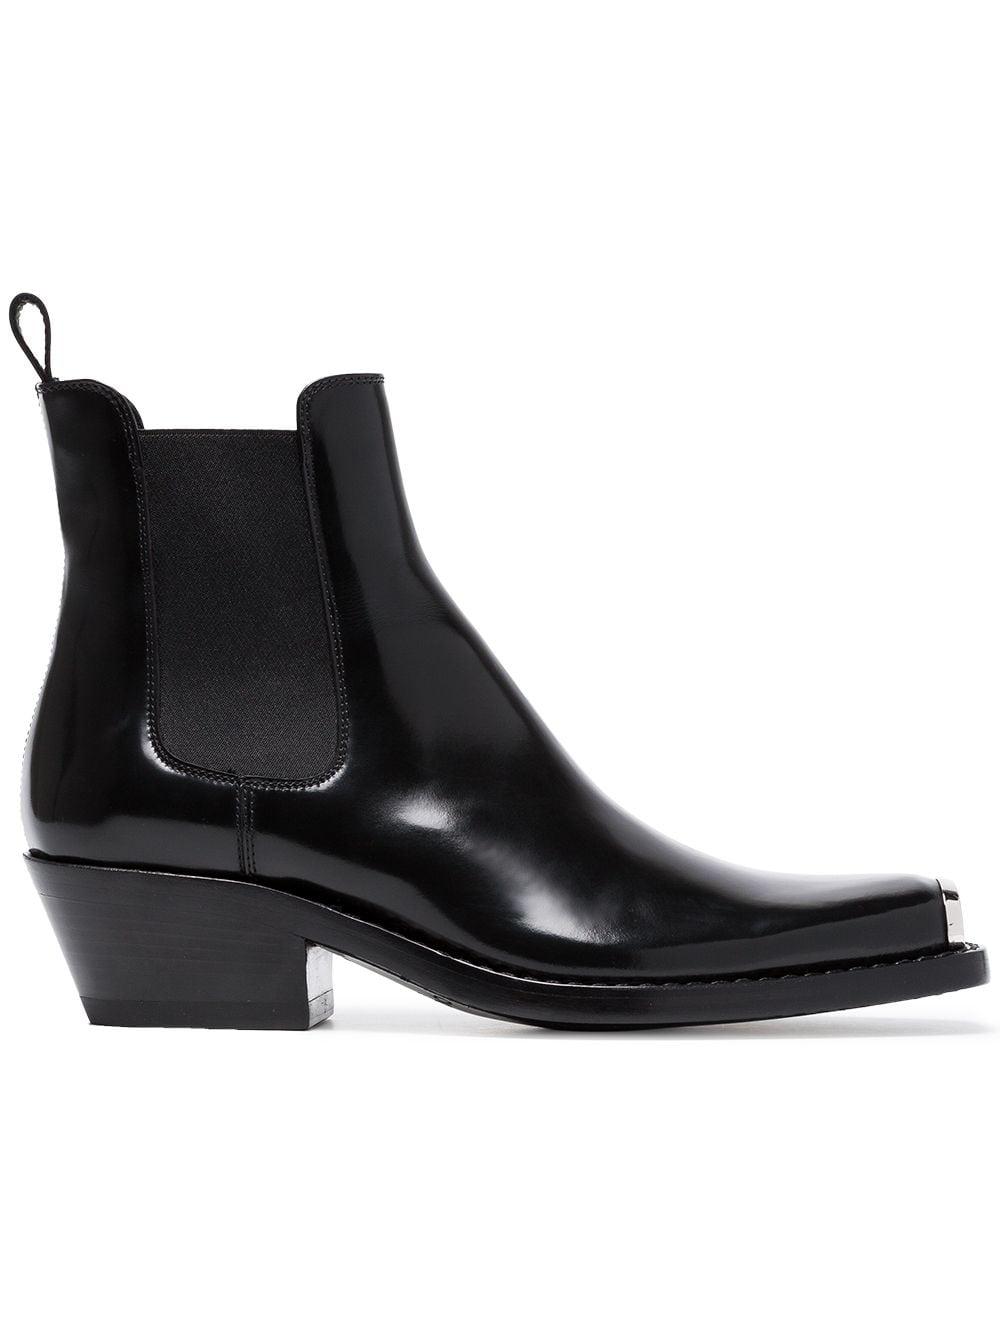 CALVIN KLEIN 205W39NYC Claire 40 Western Ankle Boots in Black | Lyst  Australia